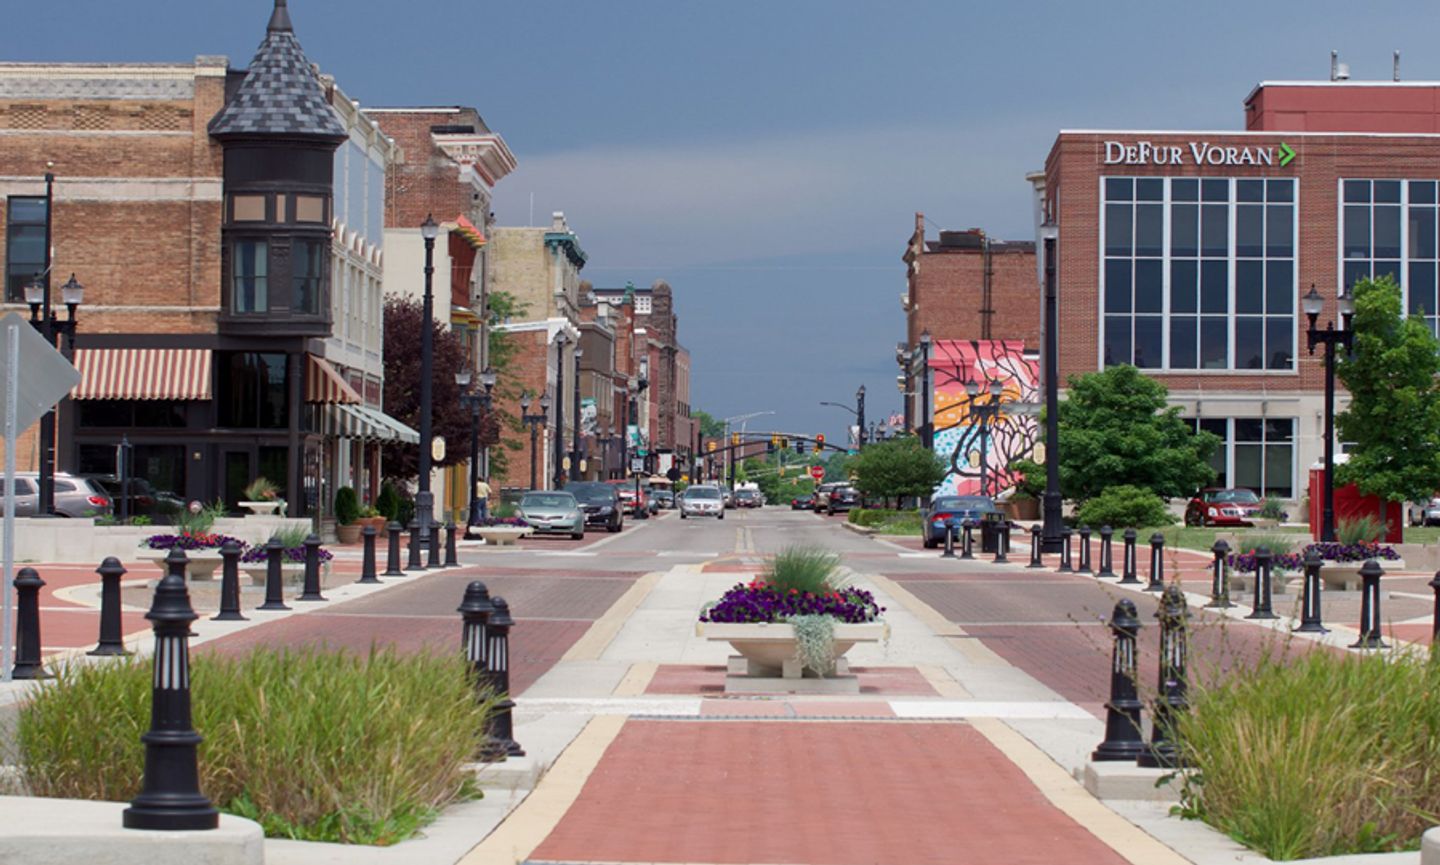 Muncie features arts and entertainment attractions, sporting events, and unique neighborhoods that offer plenty for the whole family.